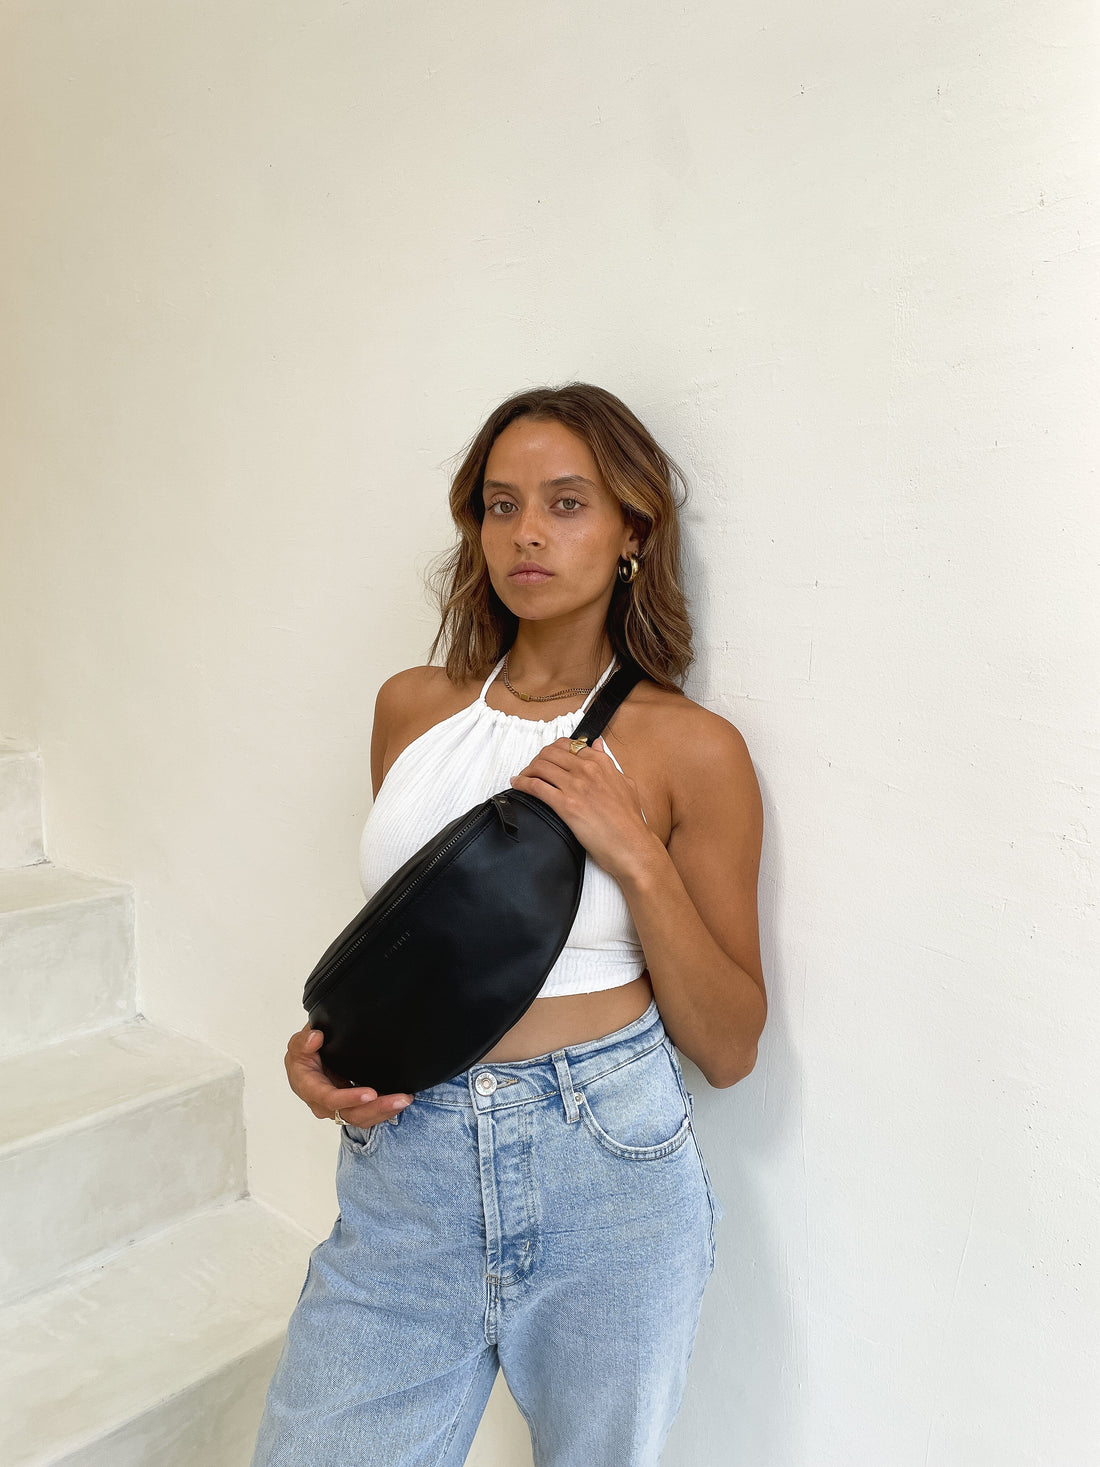 MANDRN | The Atlas- Tan Leather Fanny Pack